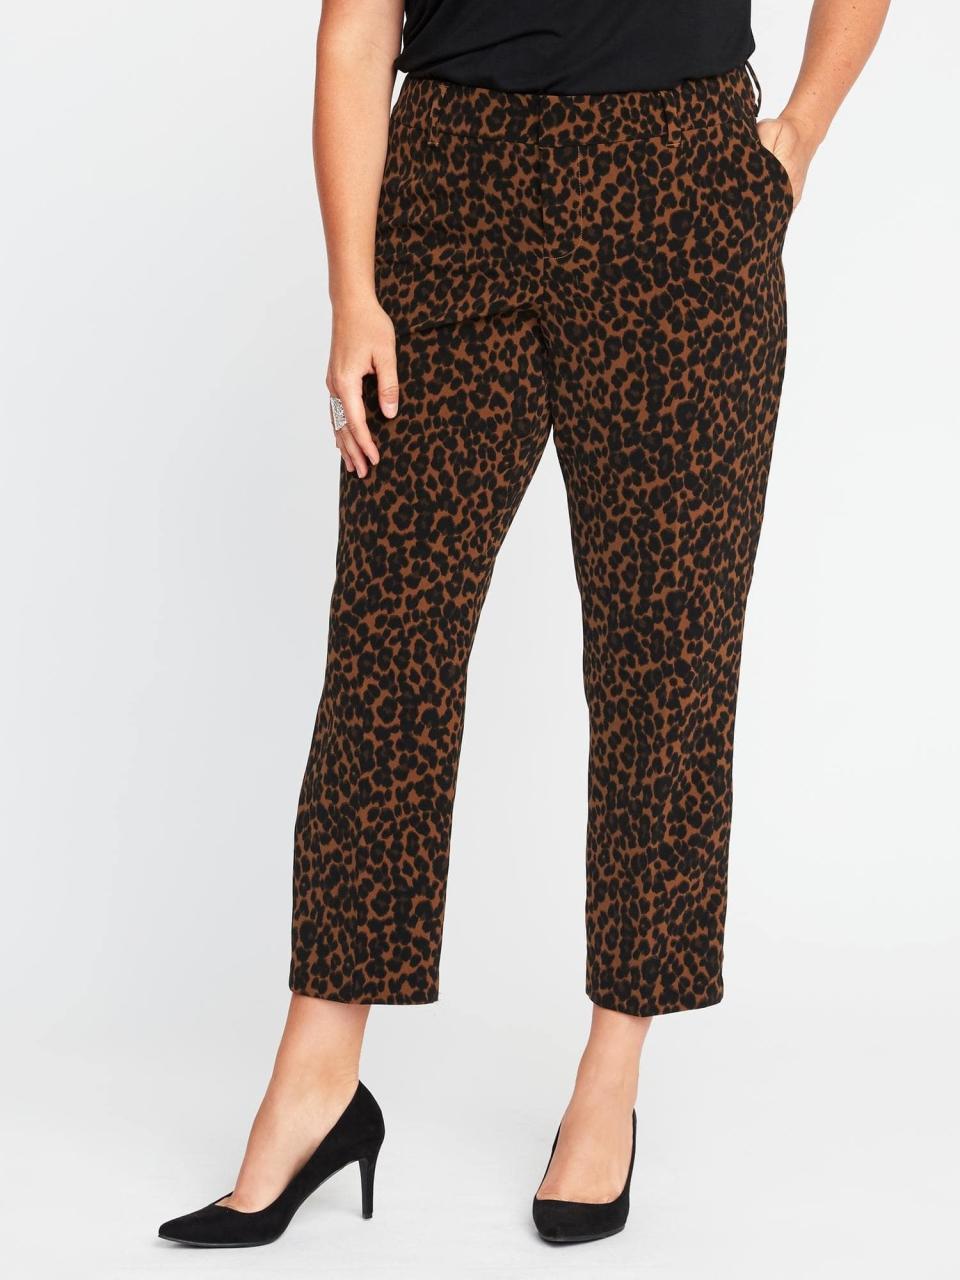 Fresh Ways to Wear Leopard Print This Fall: Pants